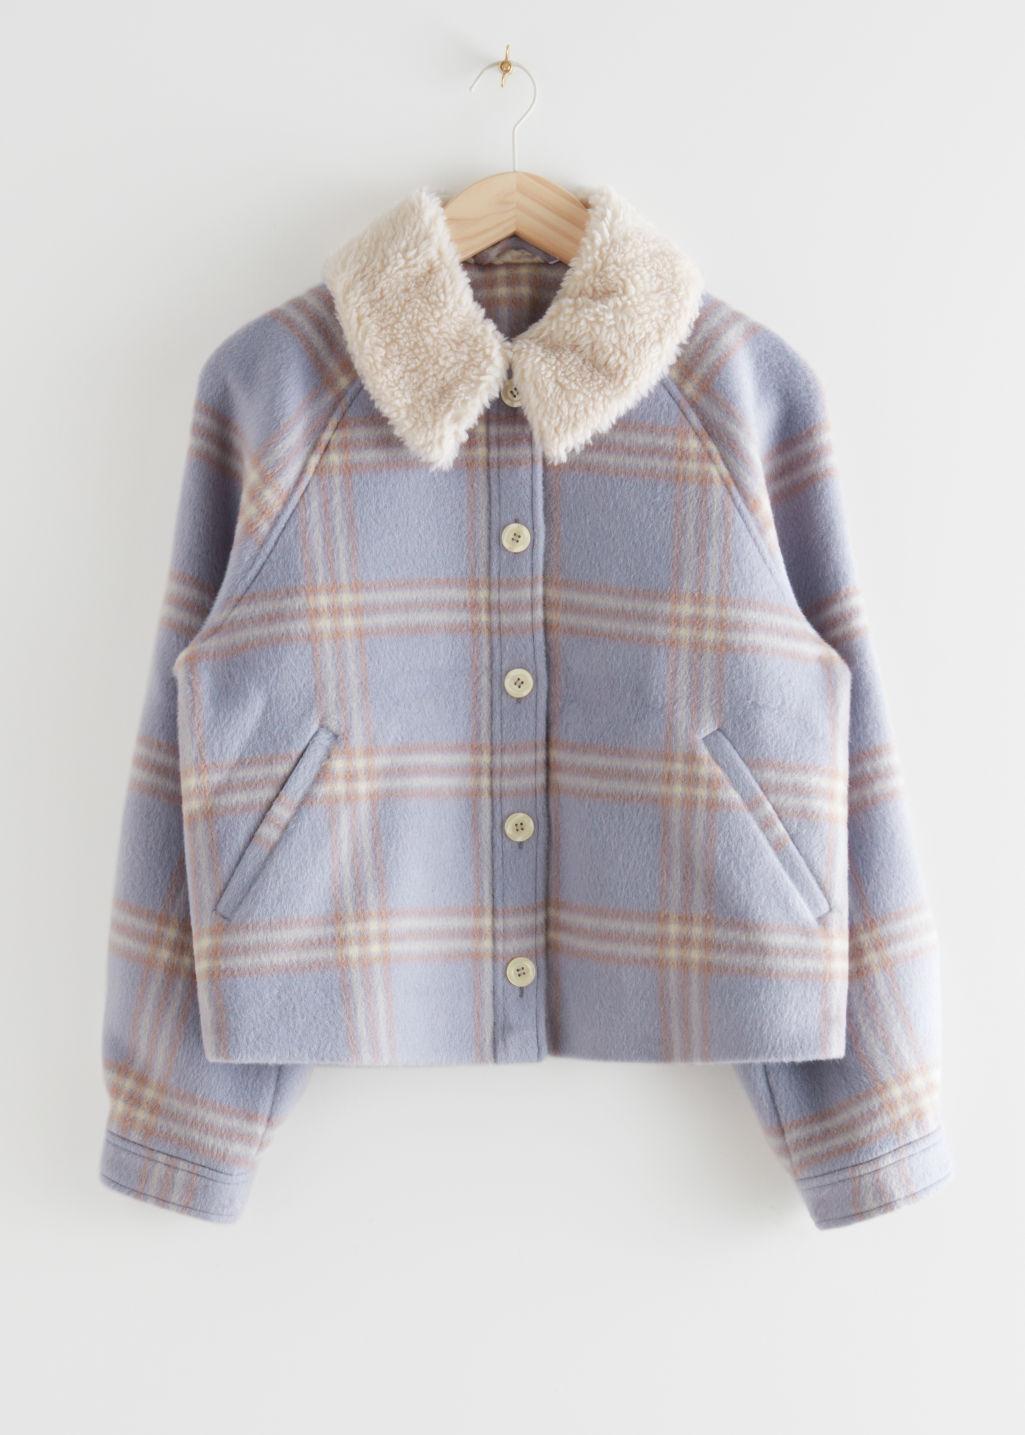 & Other Stories Collared Button Up Wool Jacket in Blue | Lyst